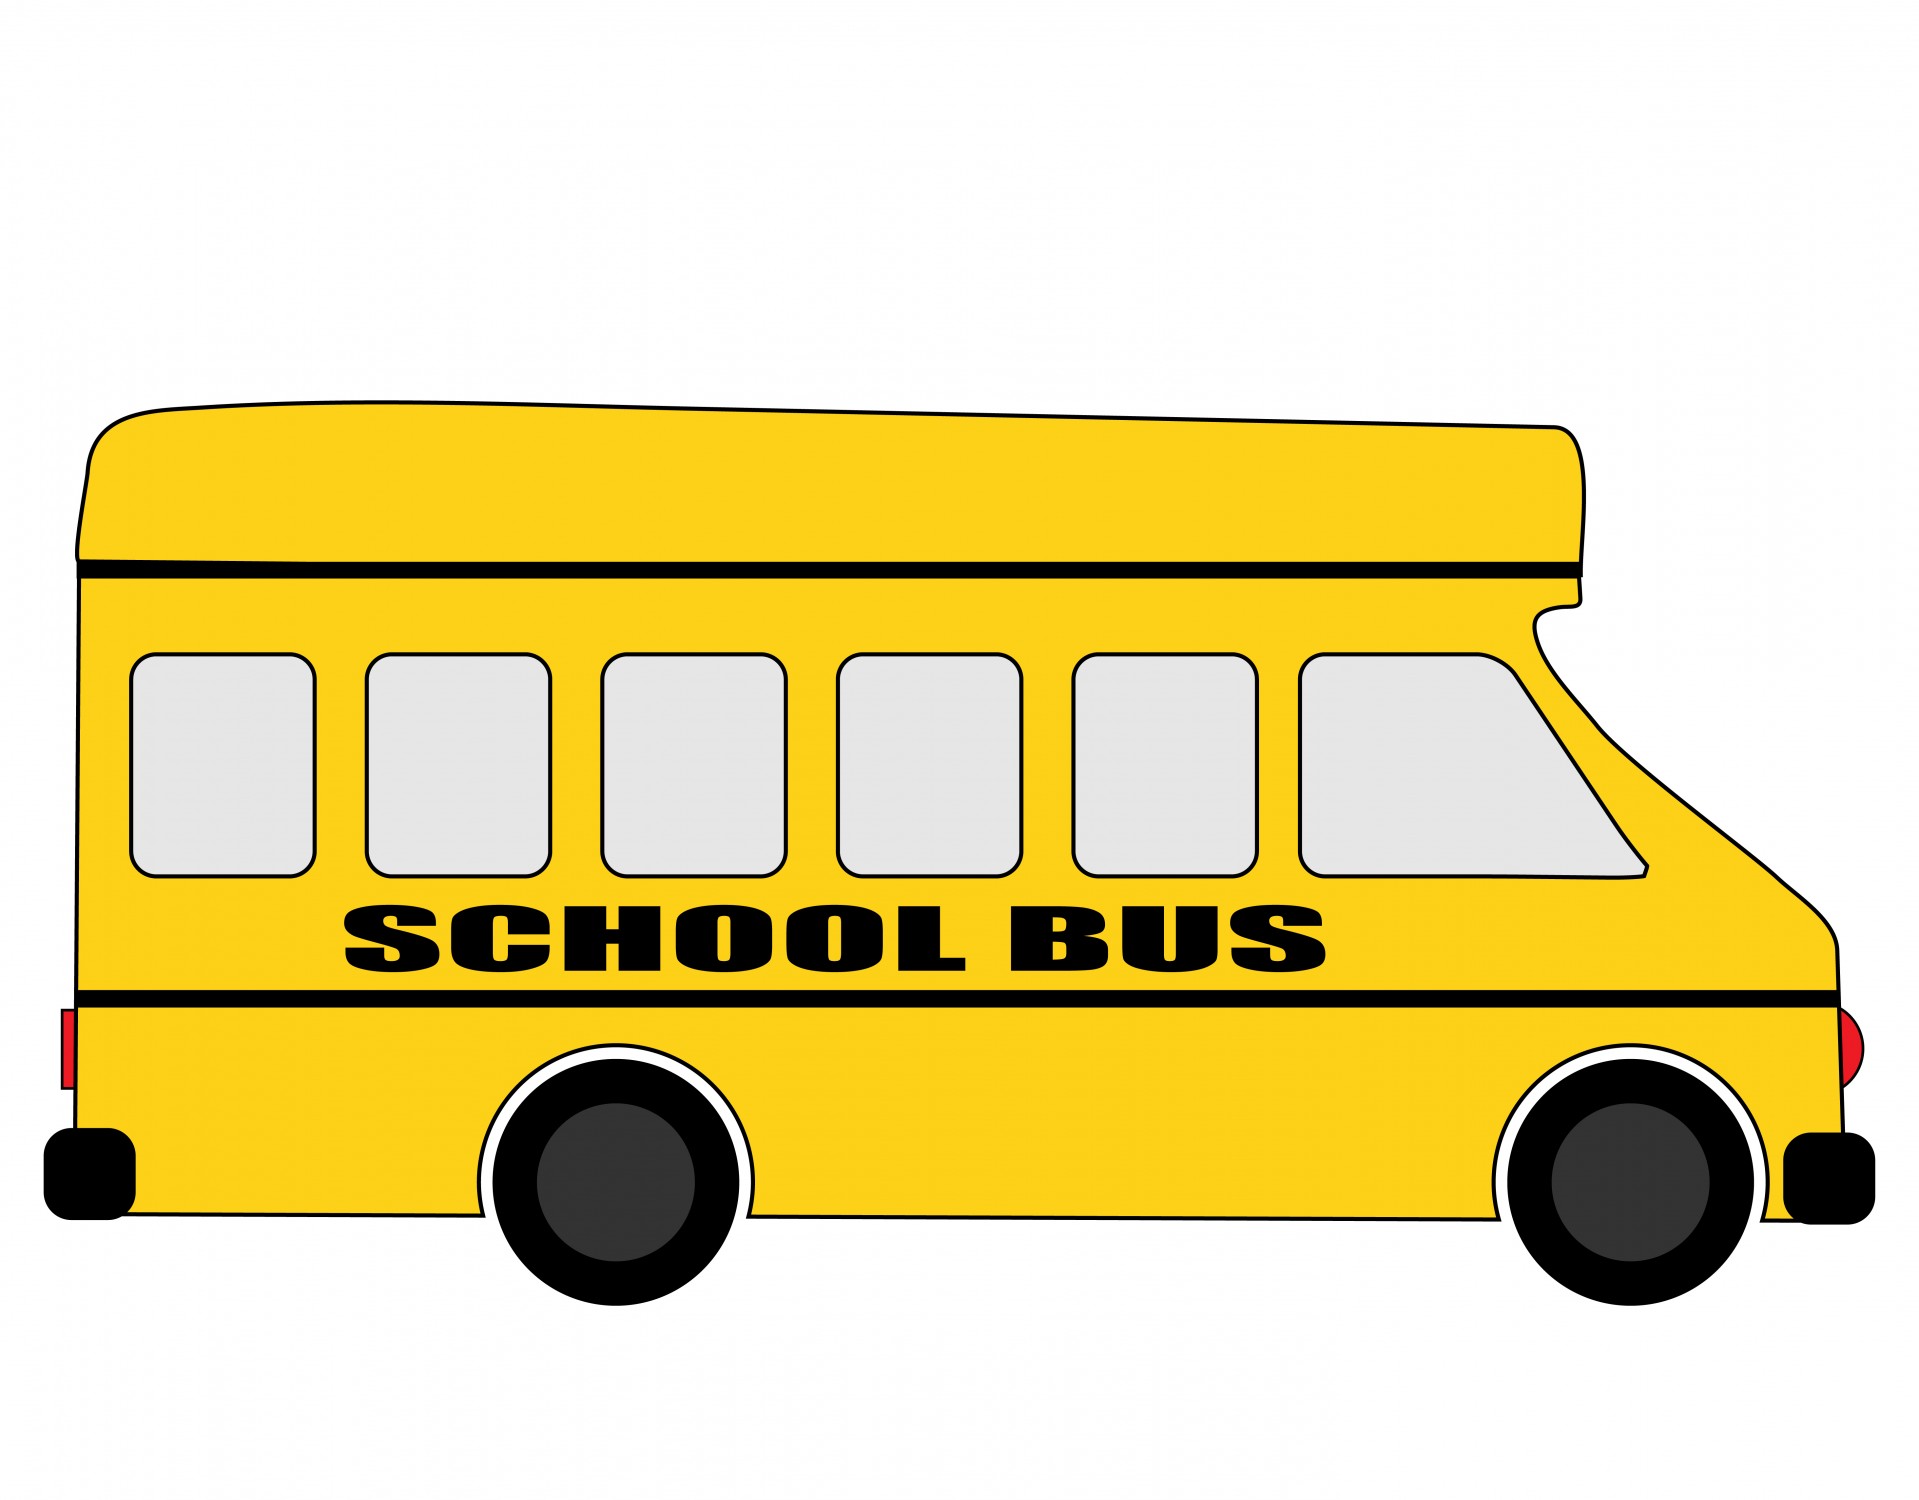 free clipart of a school bus - photo #5